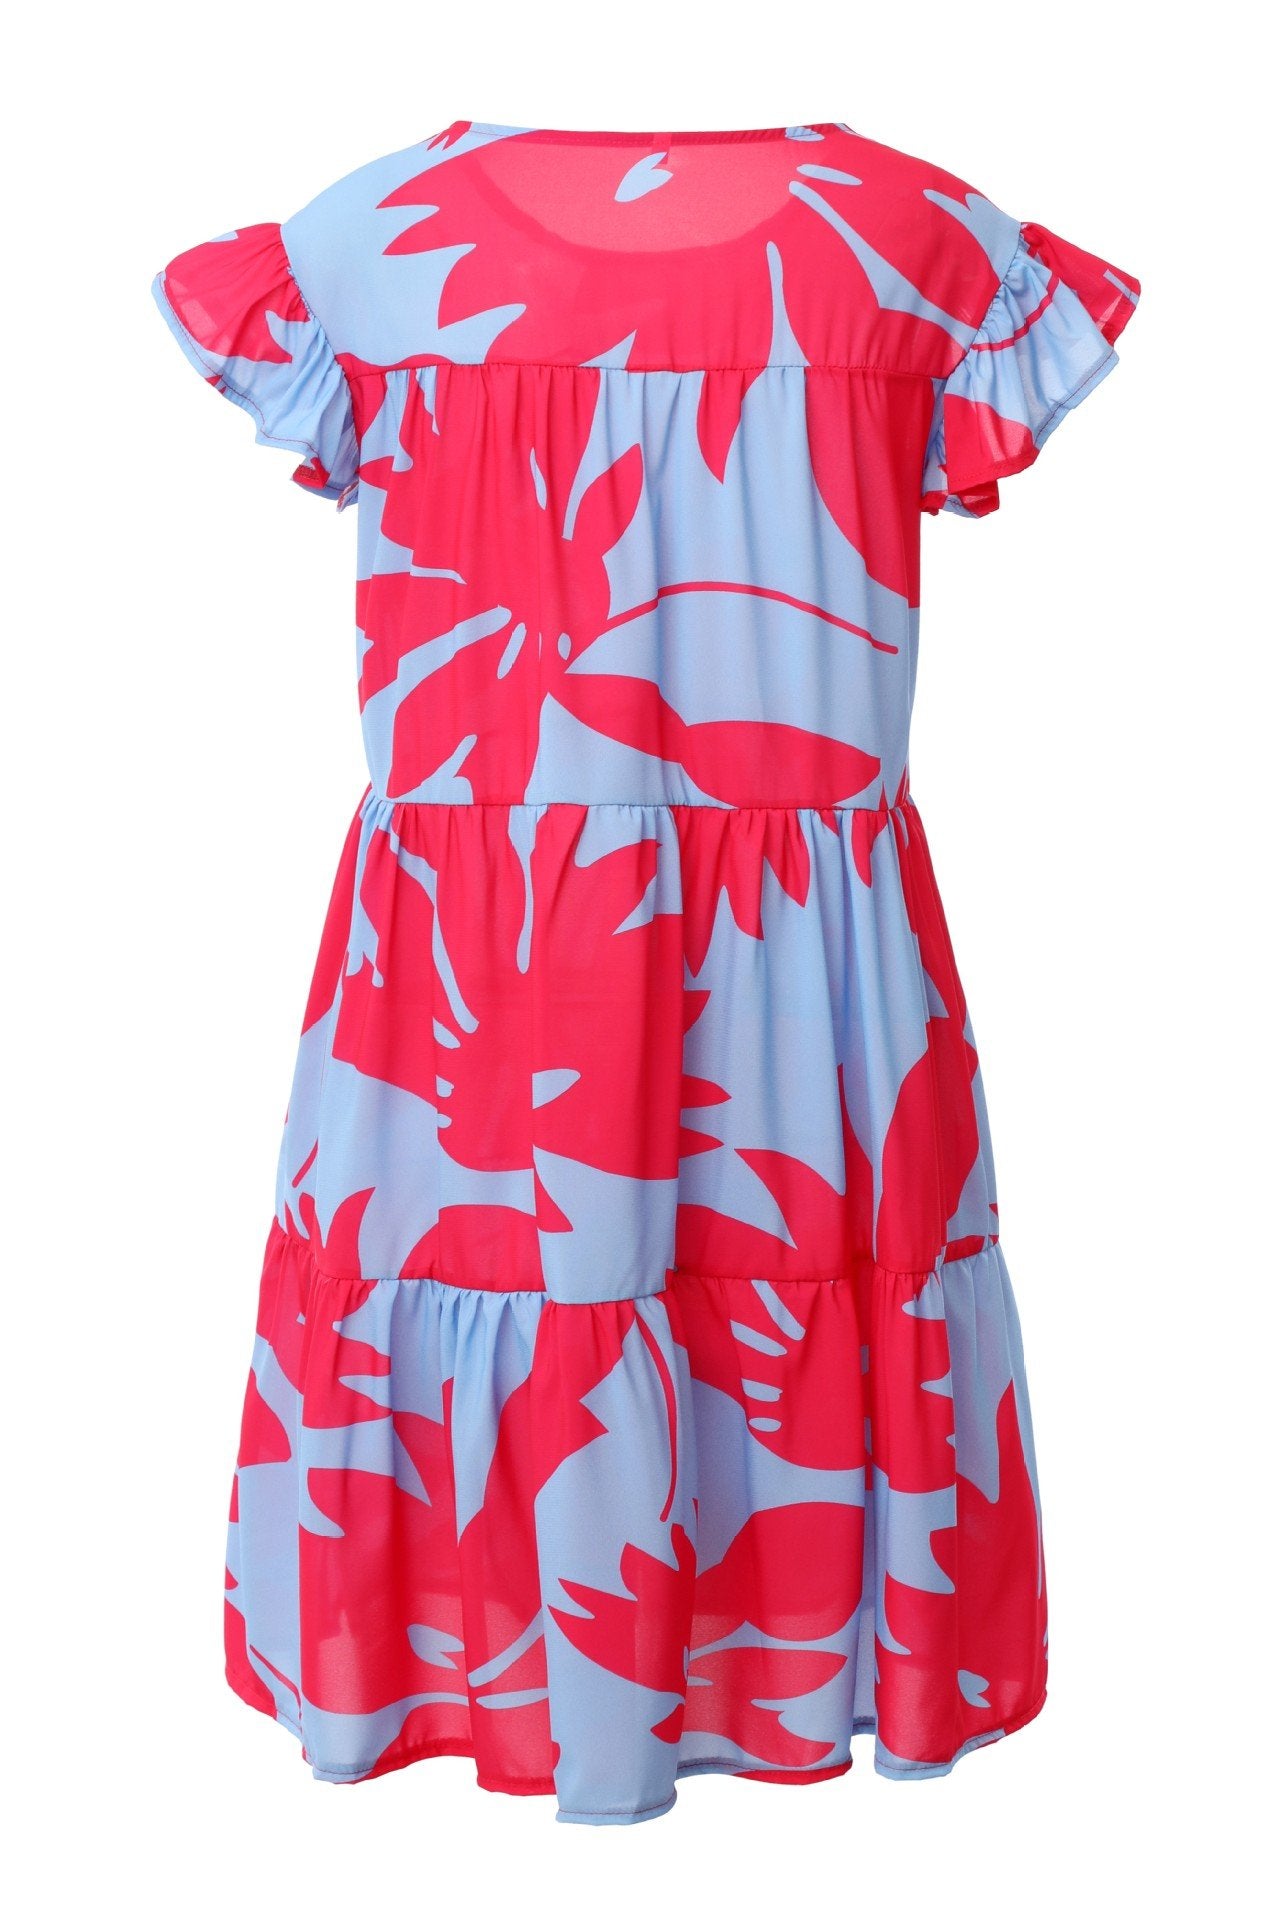 Sweety Floral Print A Line Dresses-STYLEGOING